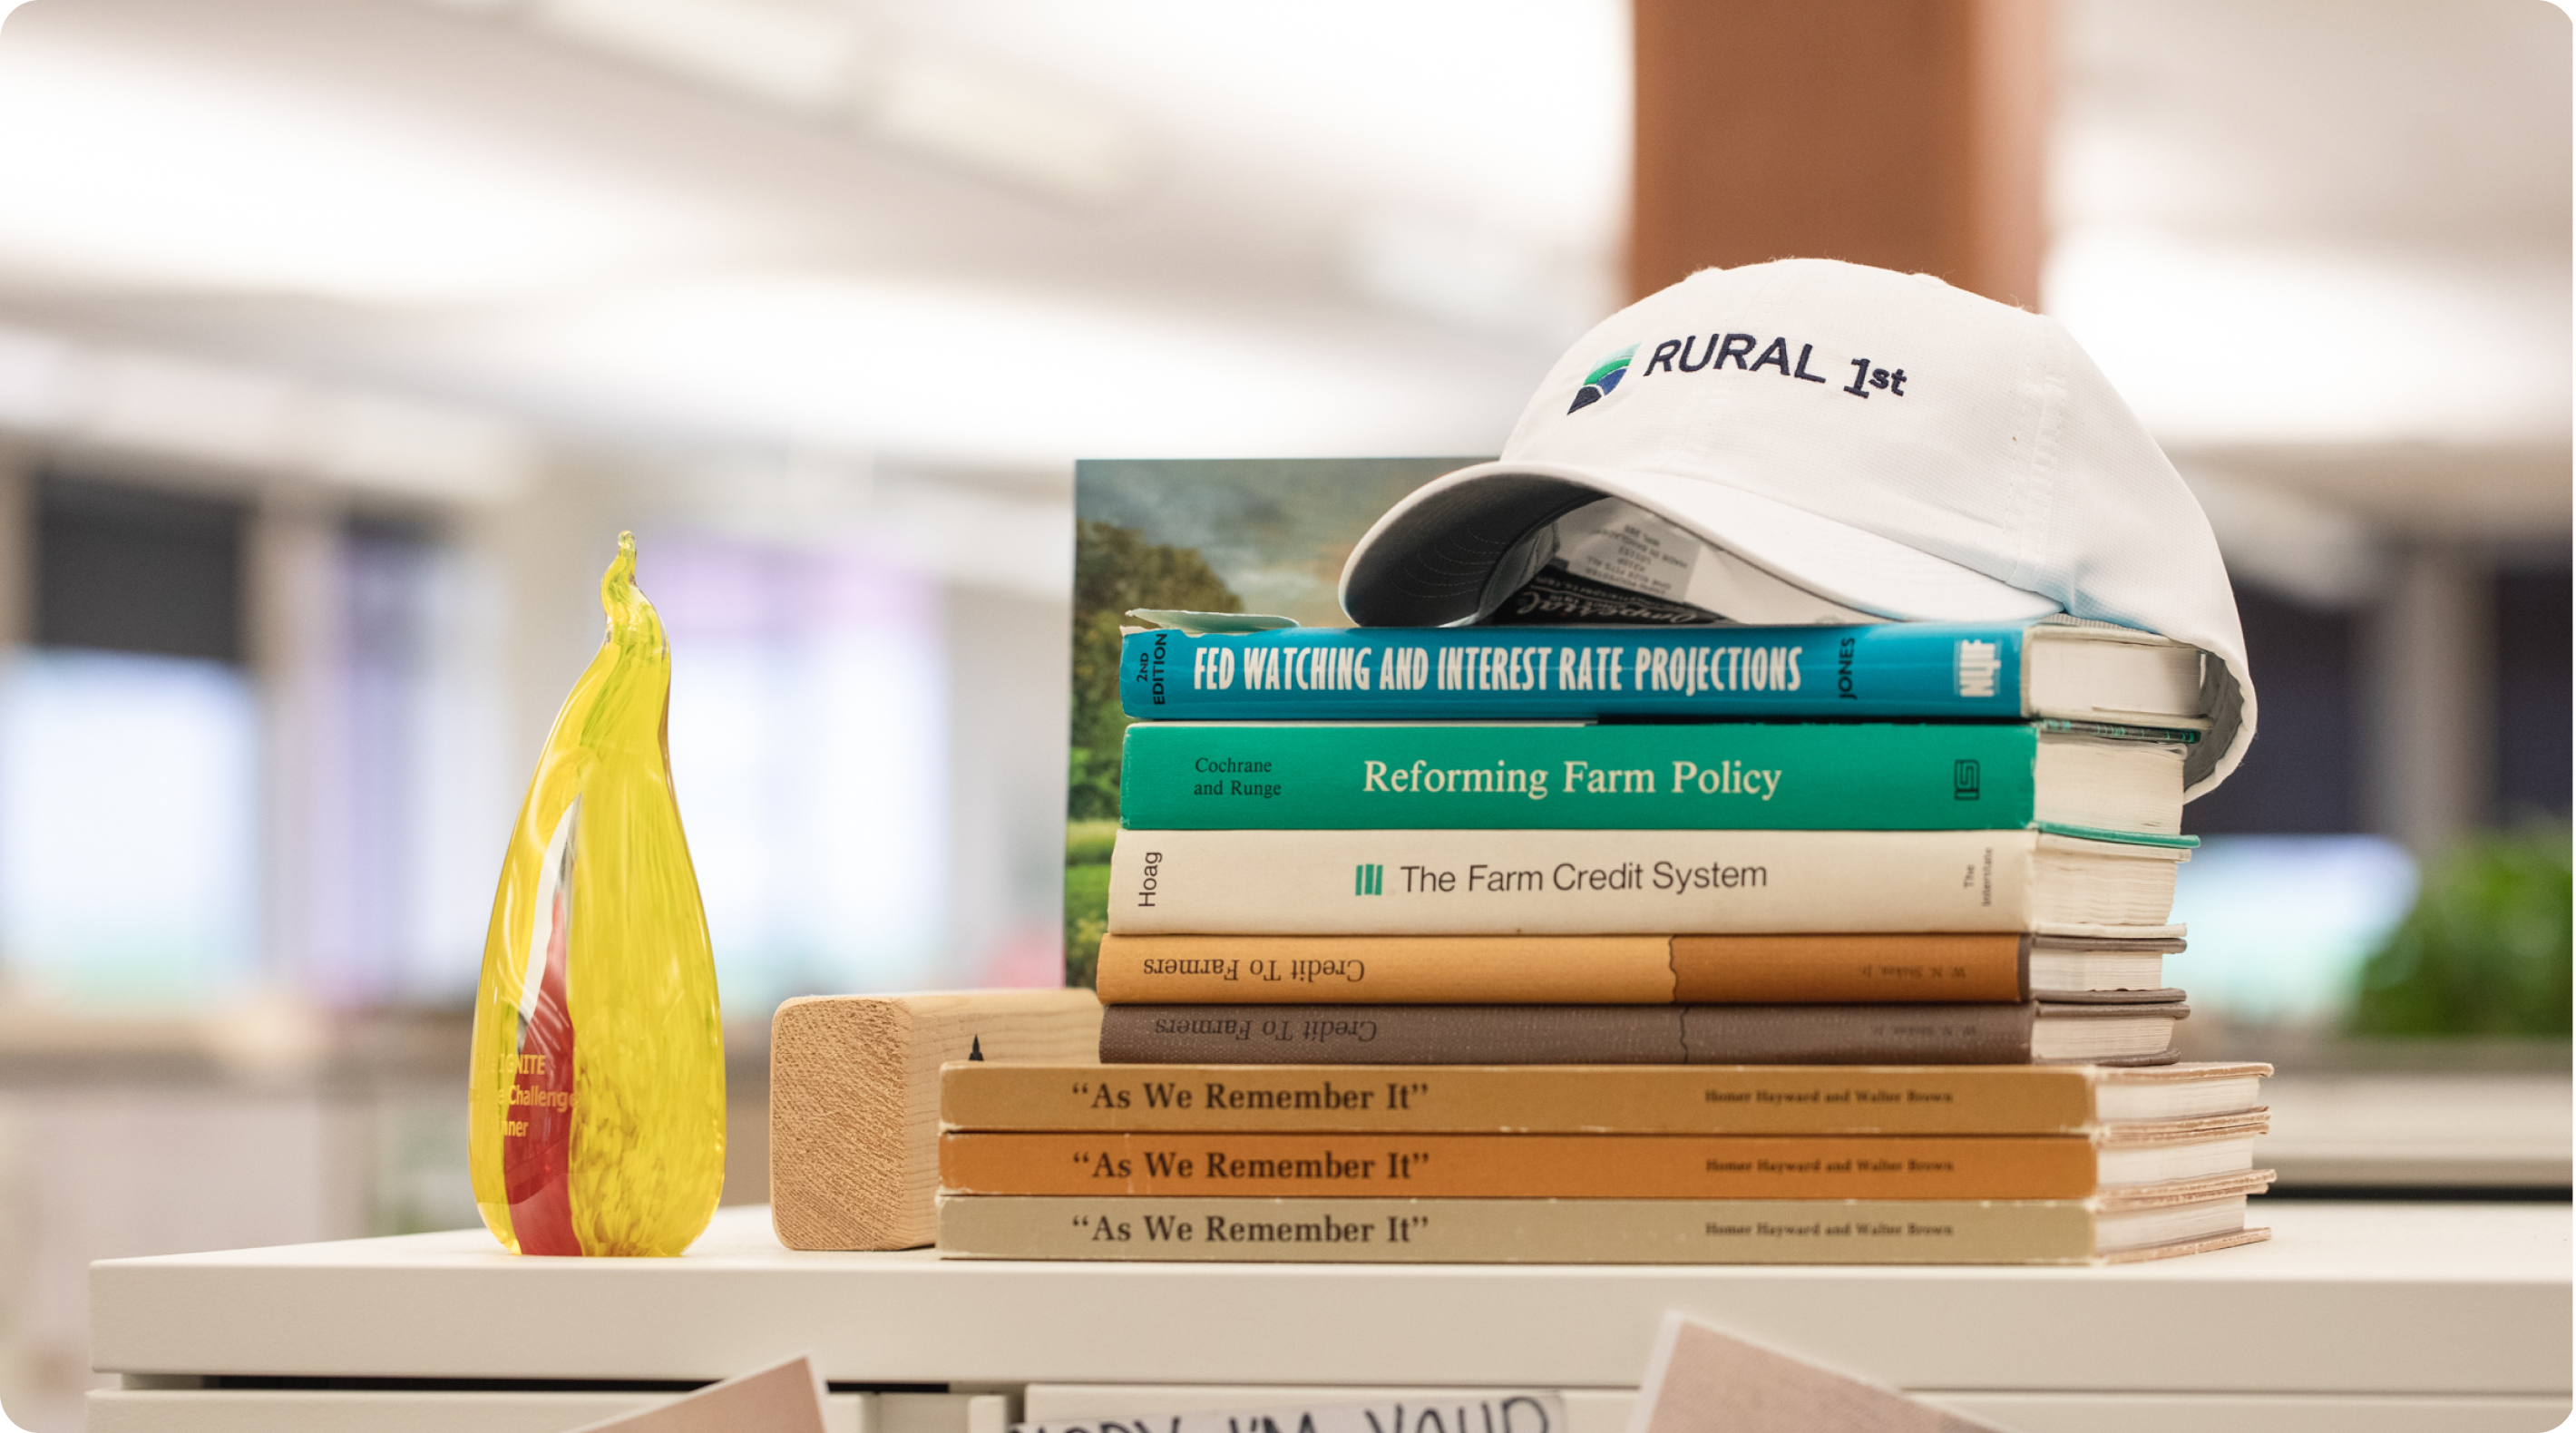 Image of stacked books with a Rural 1st baseball cap on top